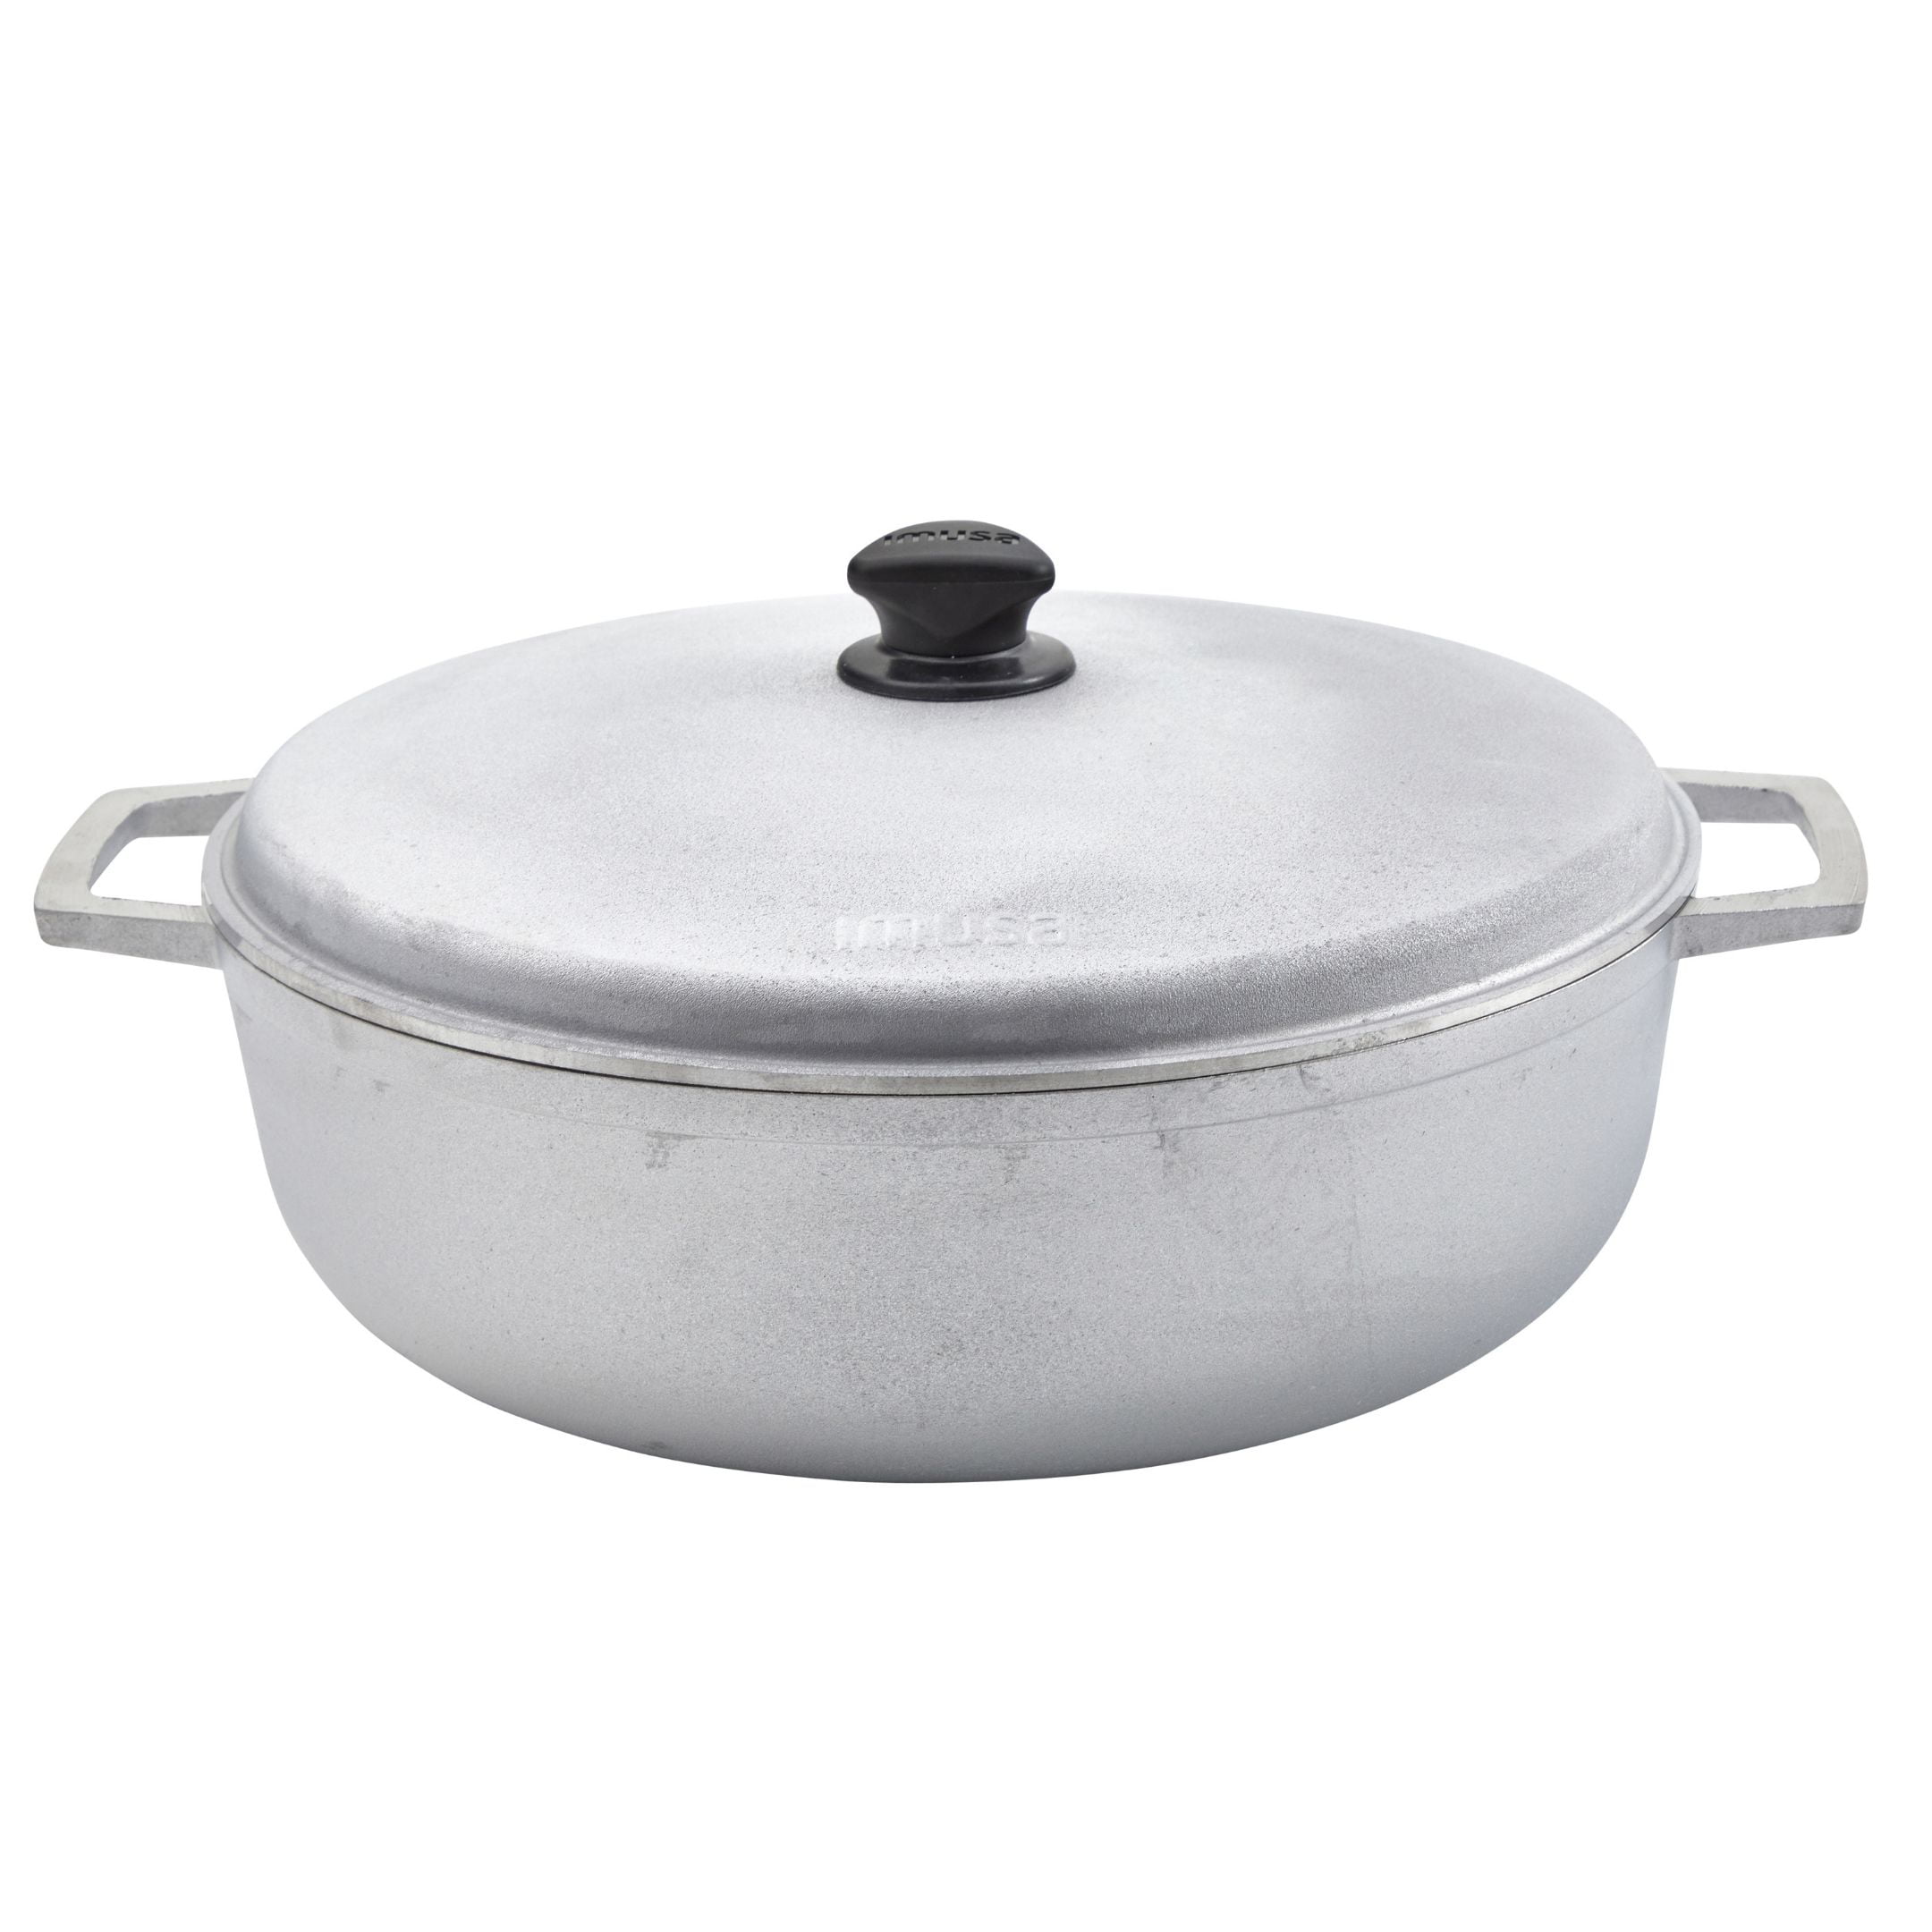 HexClad Hybrid 8 QT Pot With Lid - Silver - 130 requests